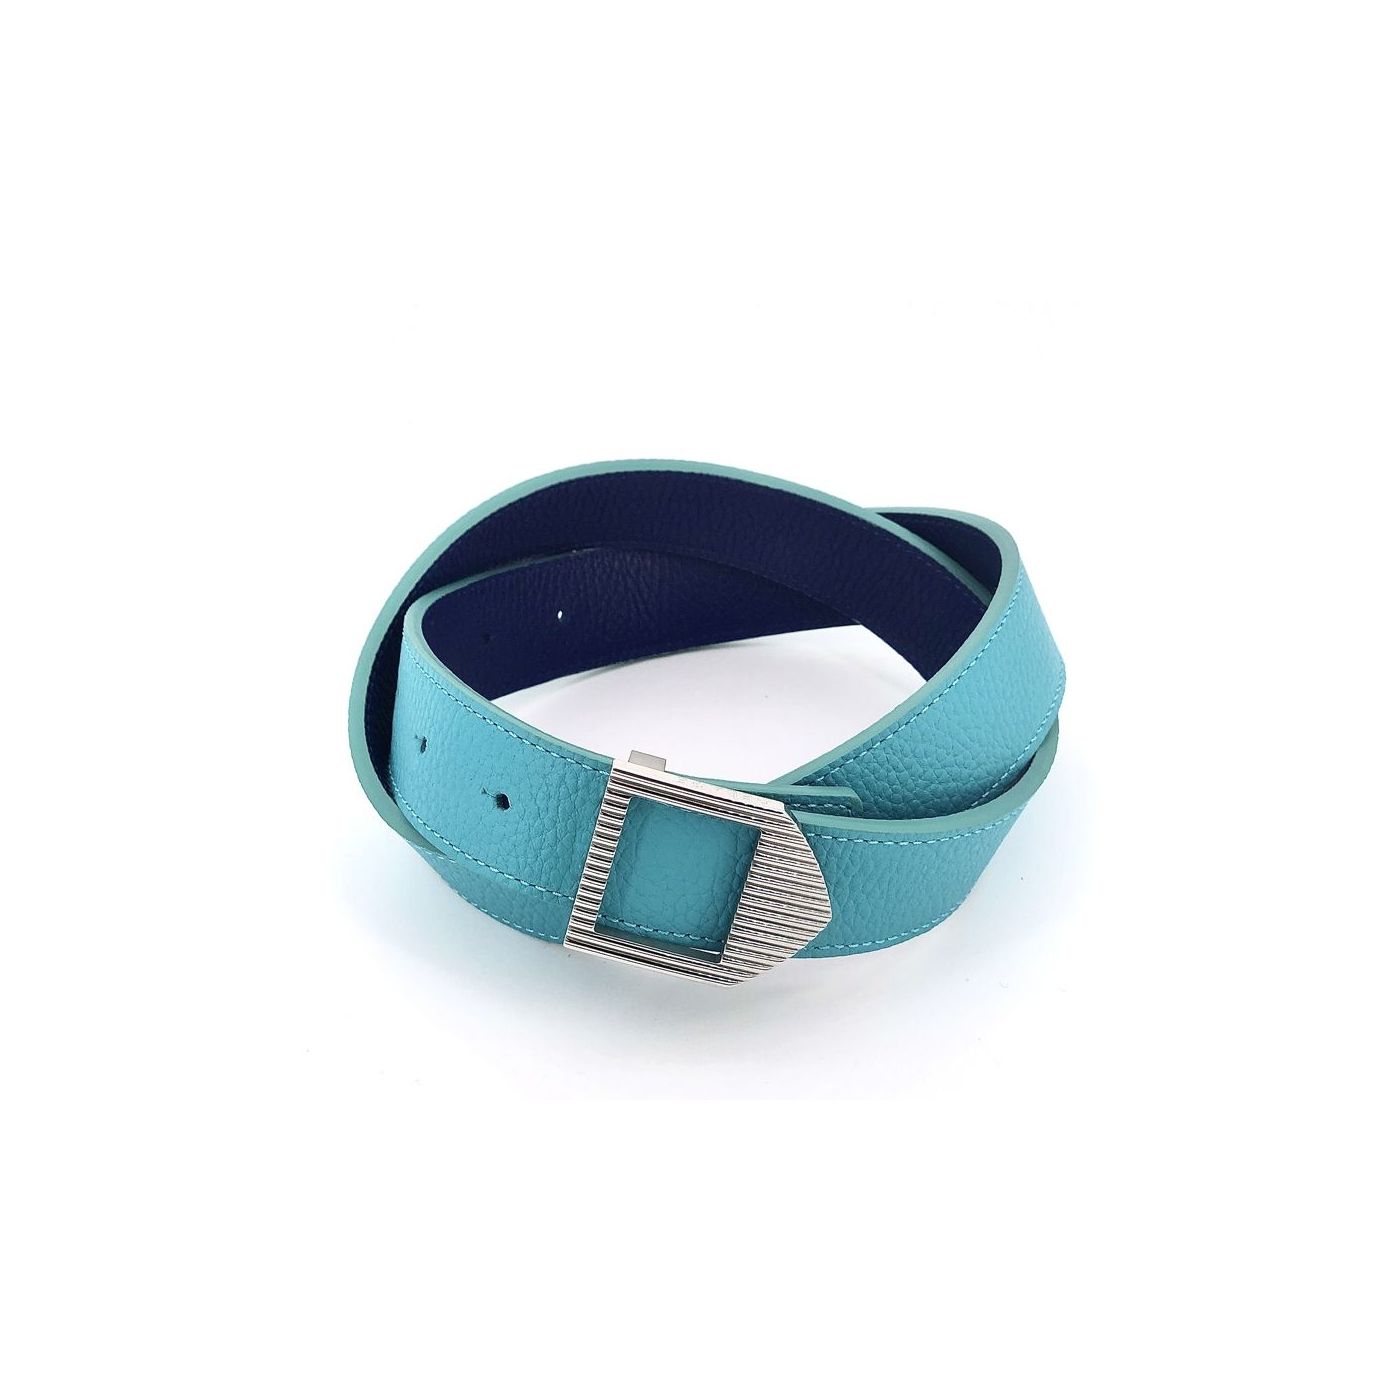 Reversible Belt Man or Woman Luxury in Leather Turquoise & Blue | Delage